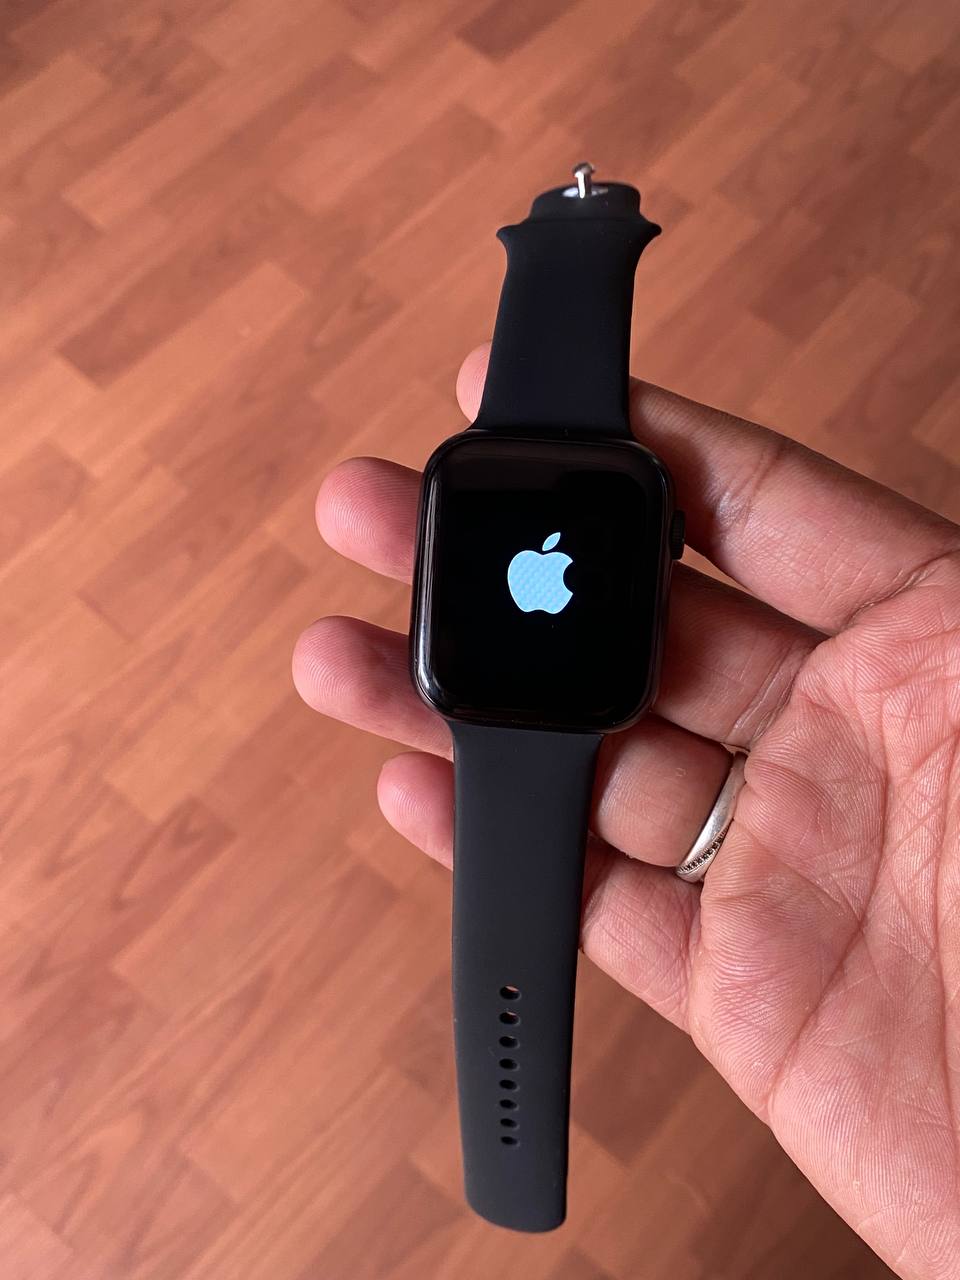 Series 8 Apple Watch front image with logo